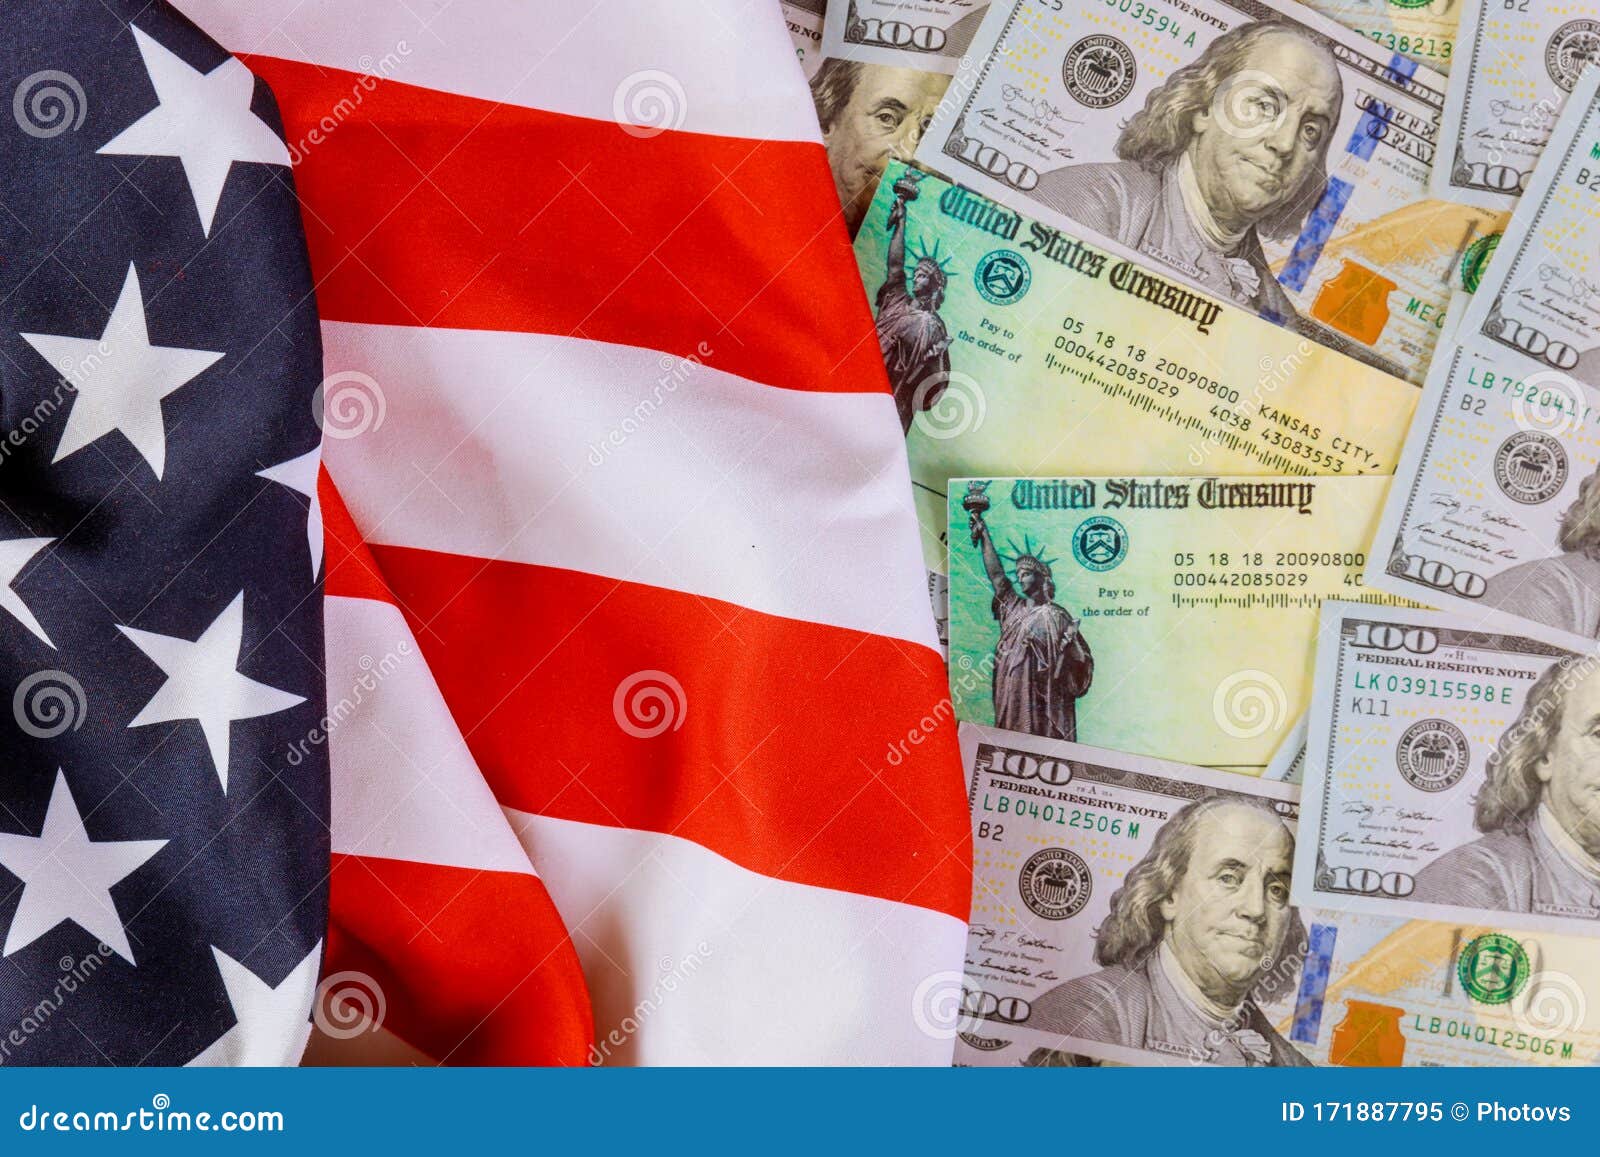 stimulus-american-economic-tax-return-check-with-us-flag-and-usa-dollar